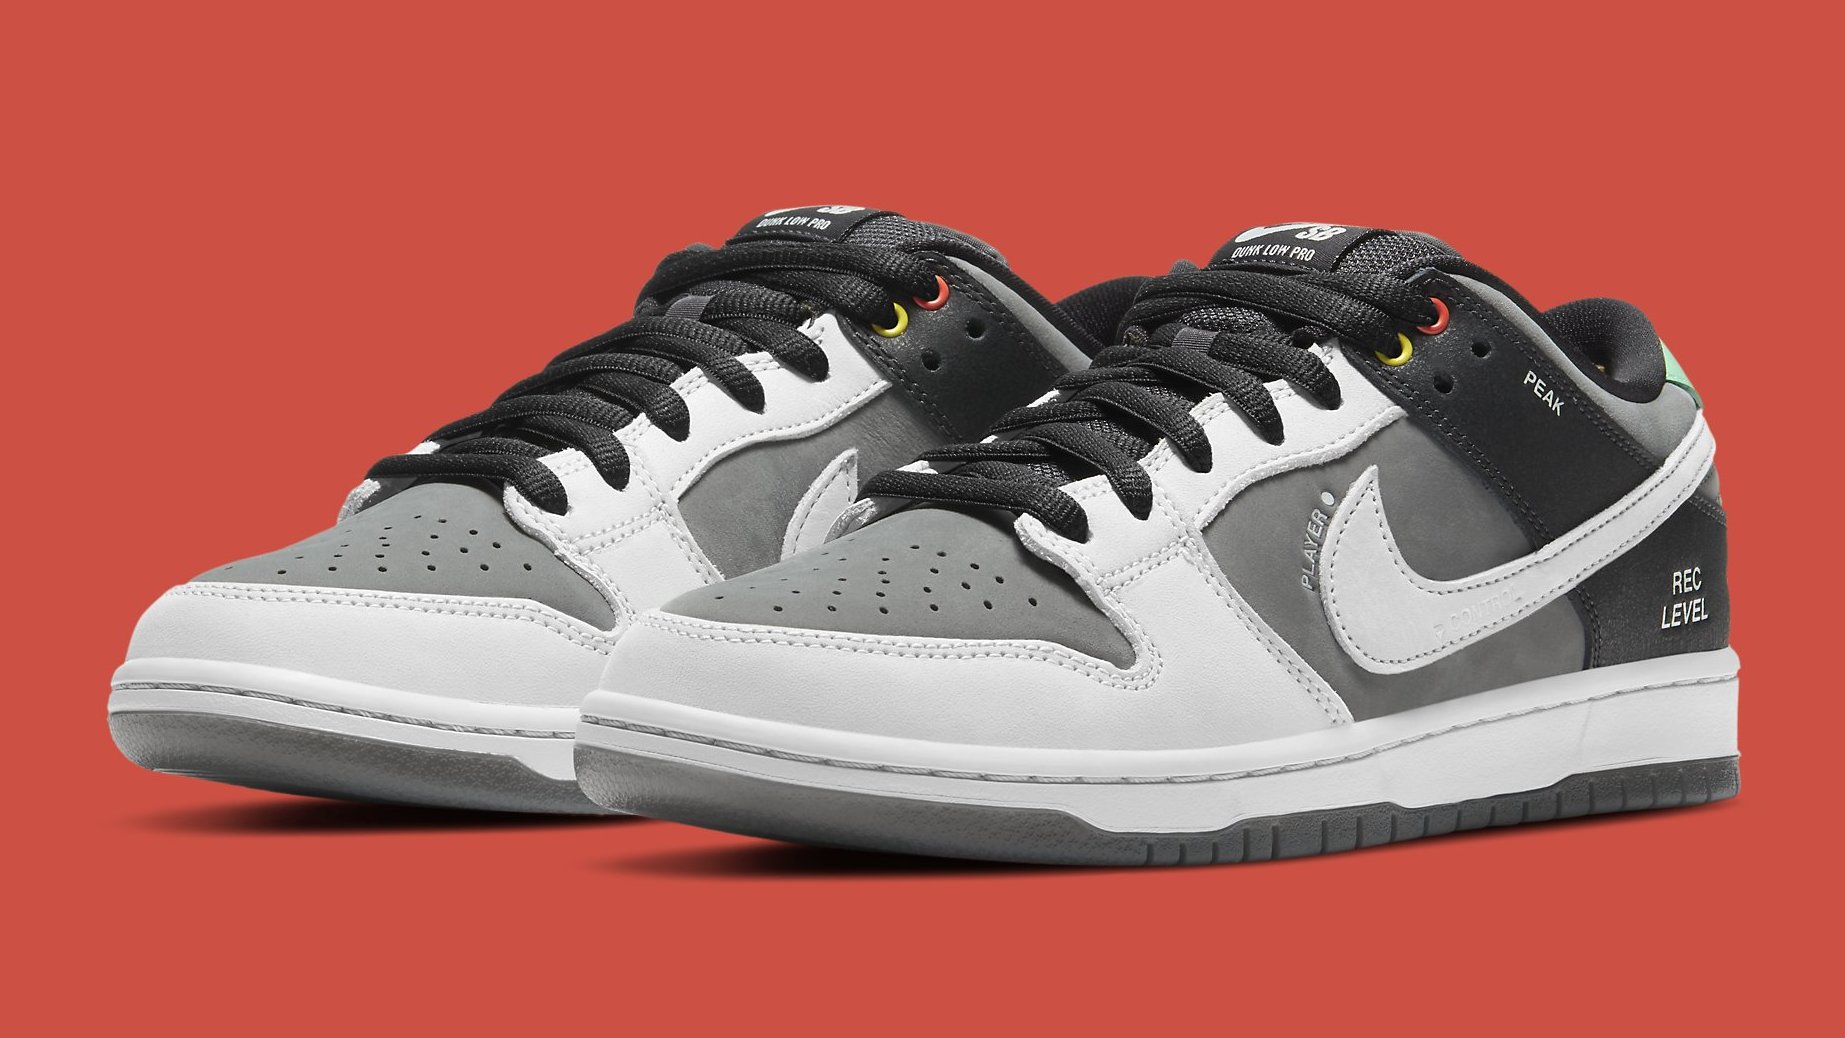 This Nike SB Dunk Is Inspired by a Skateboarding Staple | Complex